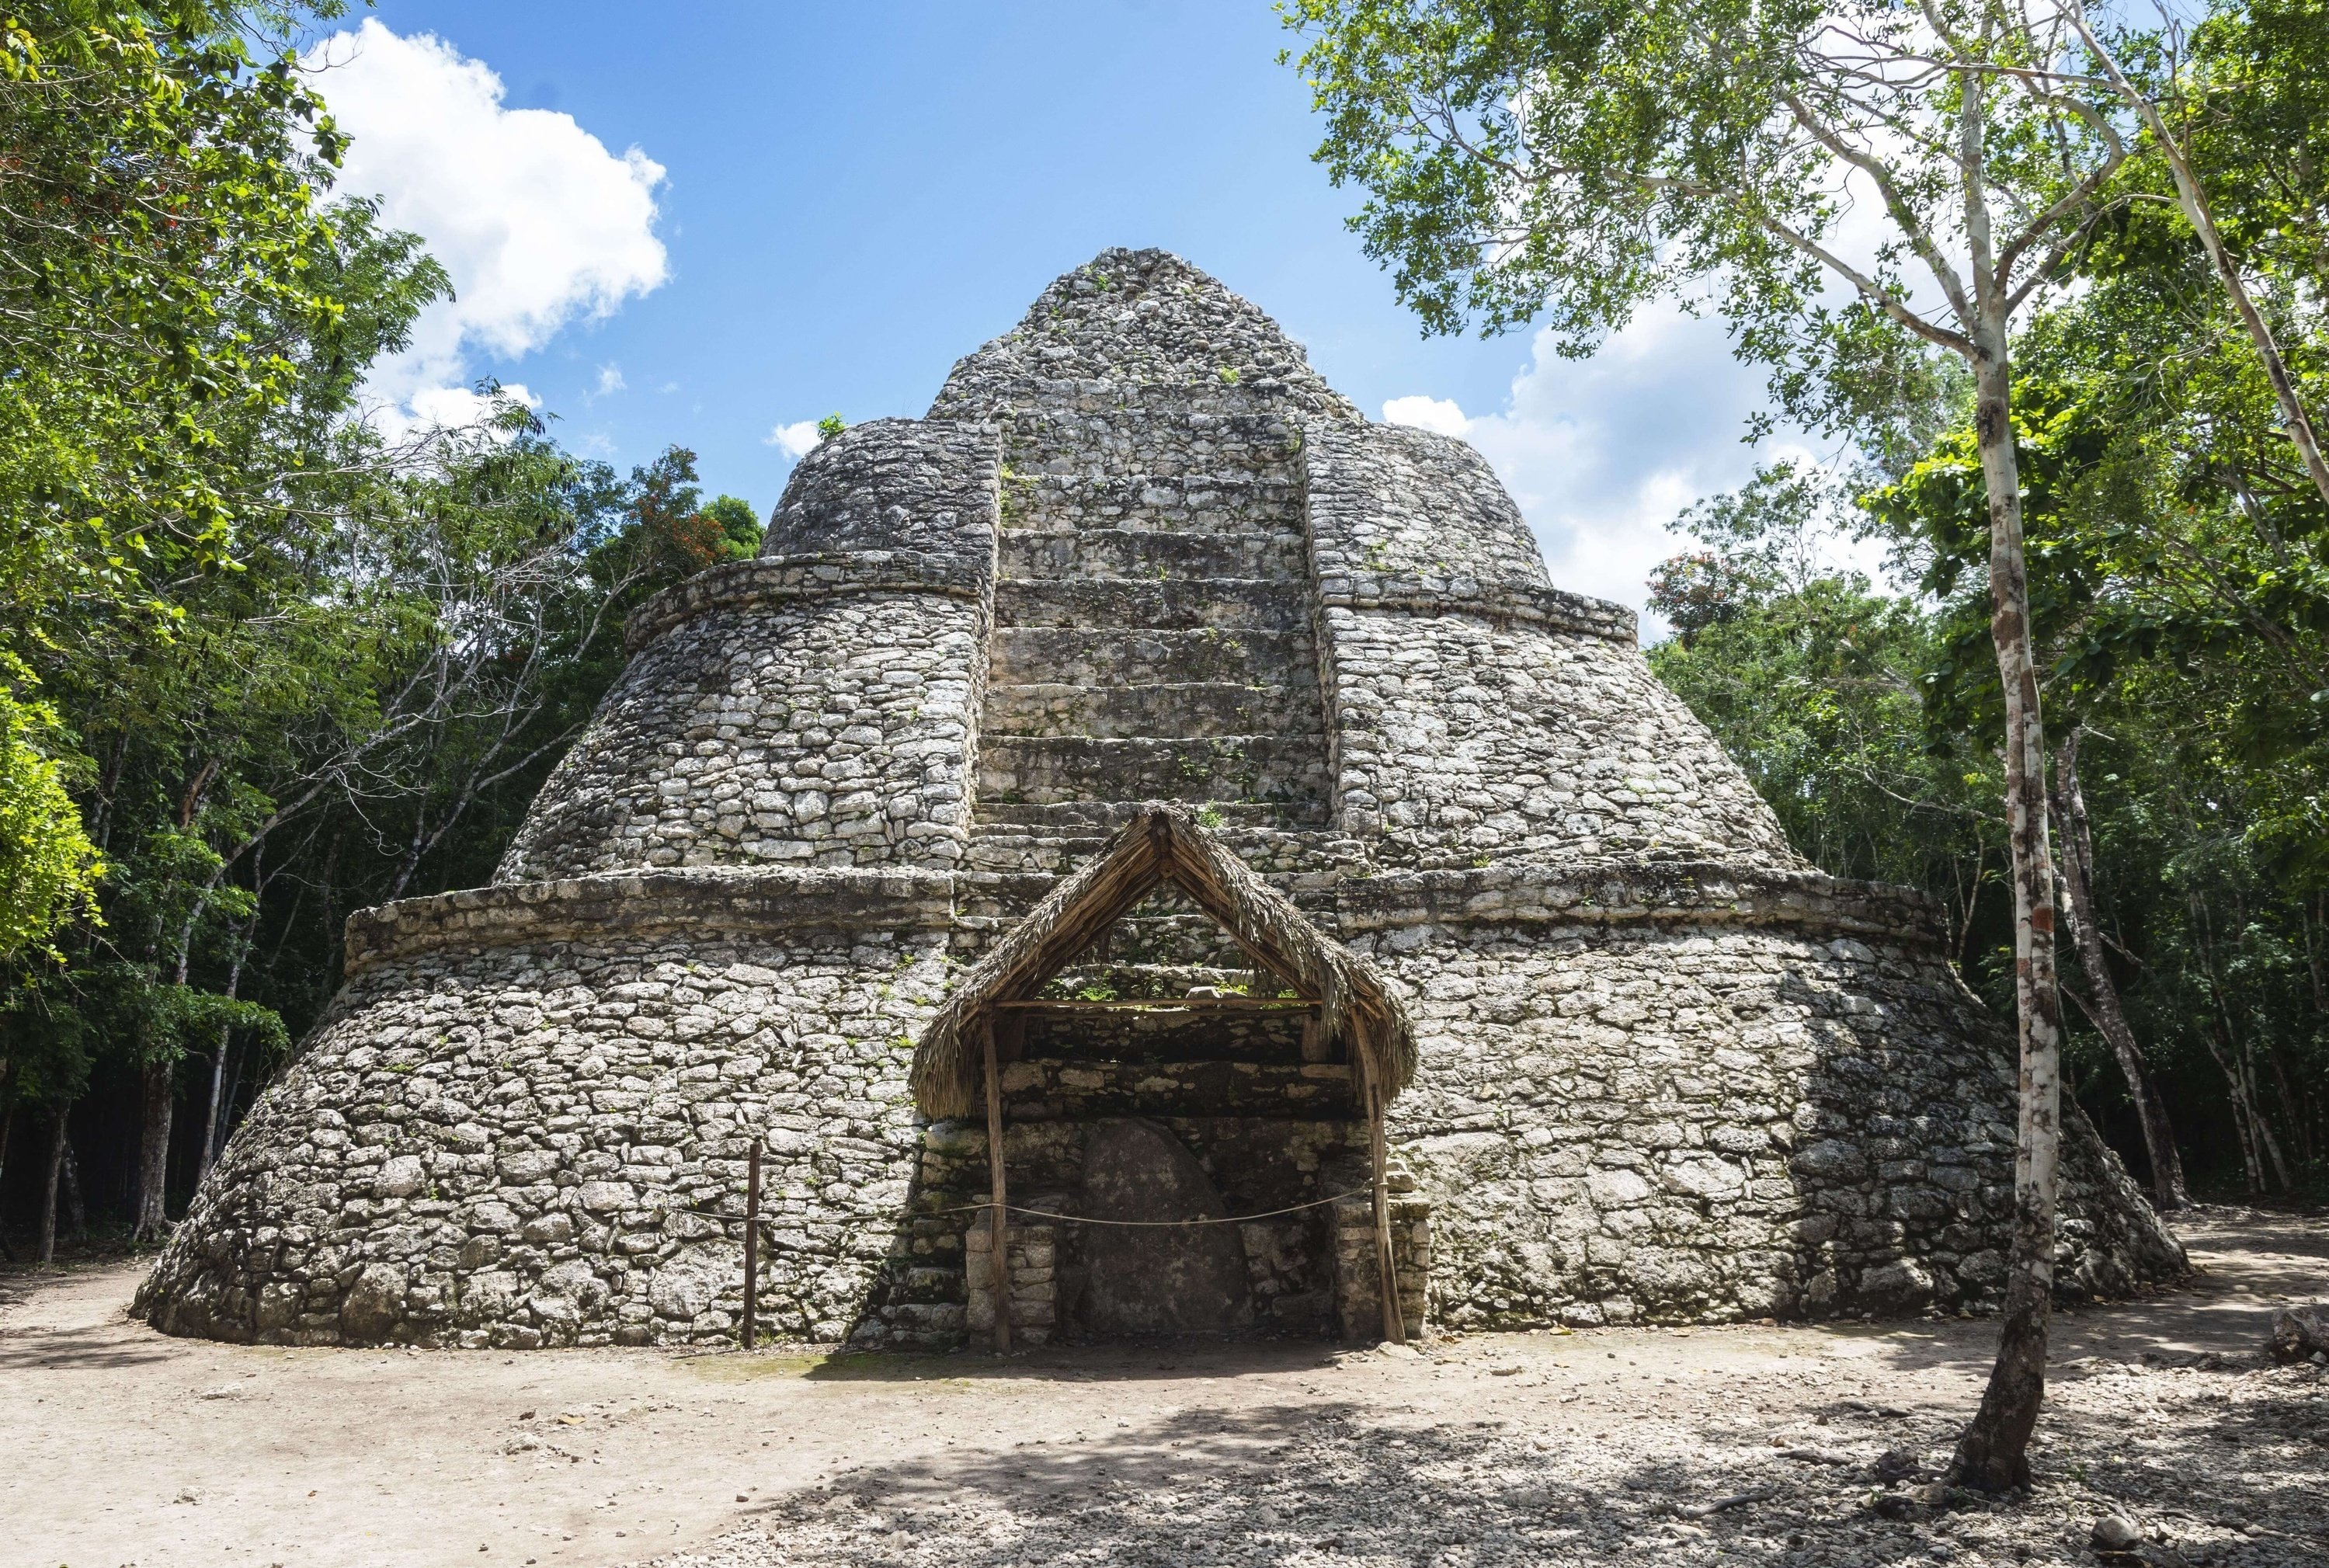 Image of the pyramid known as Xaibé or The Observatory